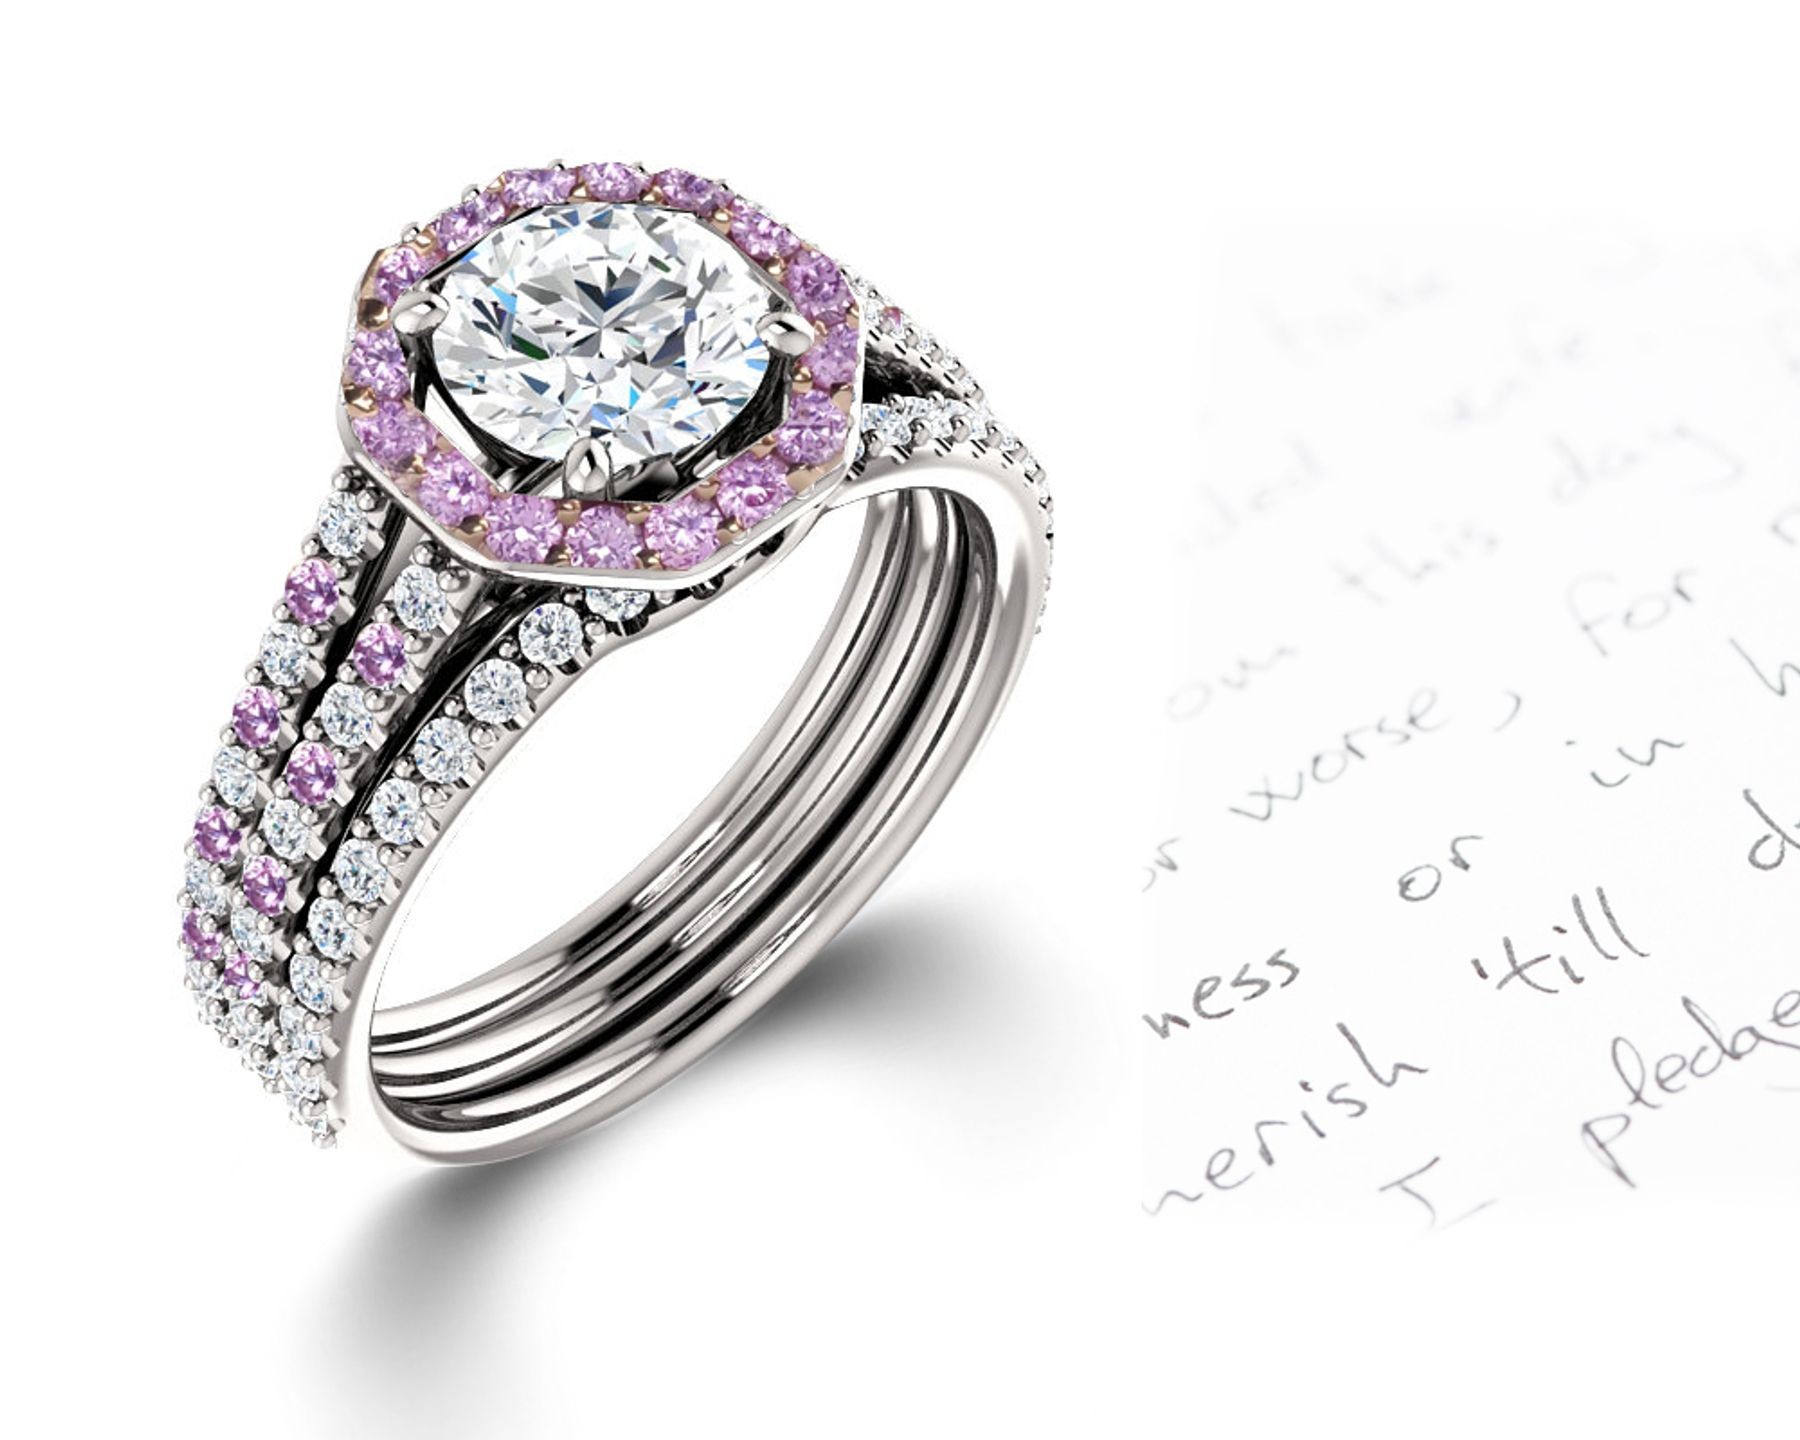 Vibrant Pink Sapphires and Diamonds Halo Micropave Engagement Rings With Vivid Colored Gemstone Accents